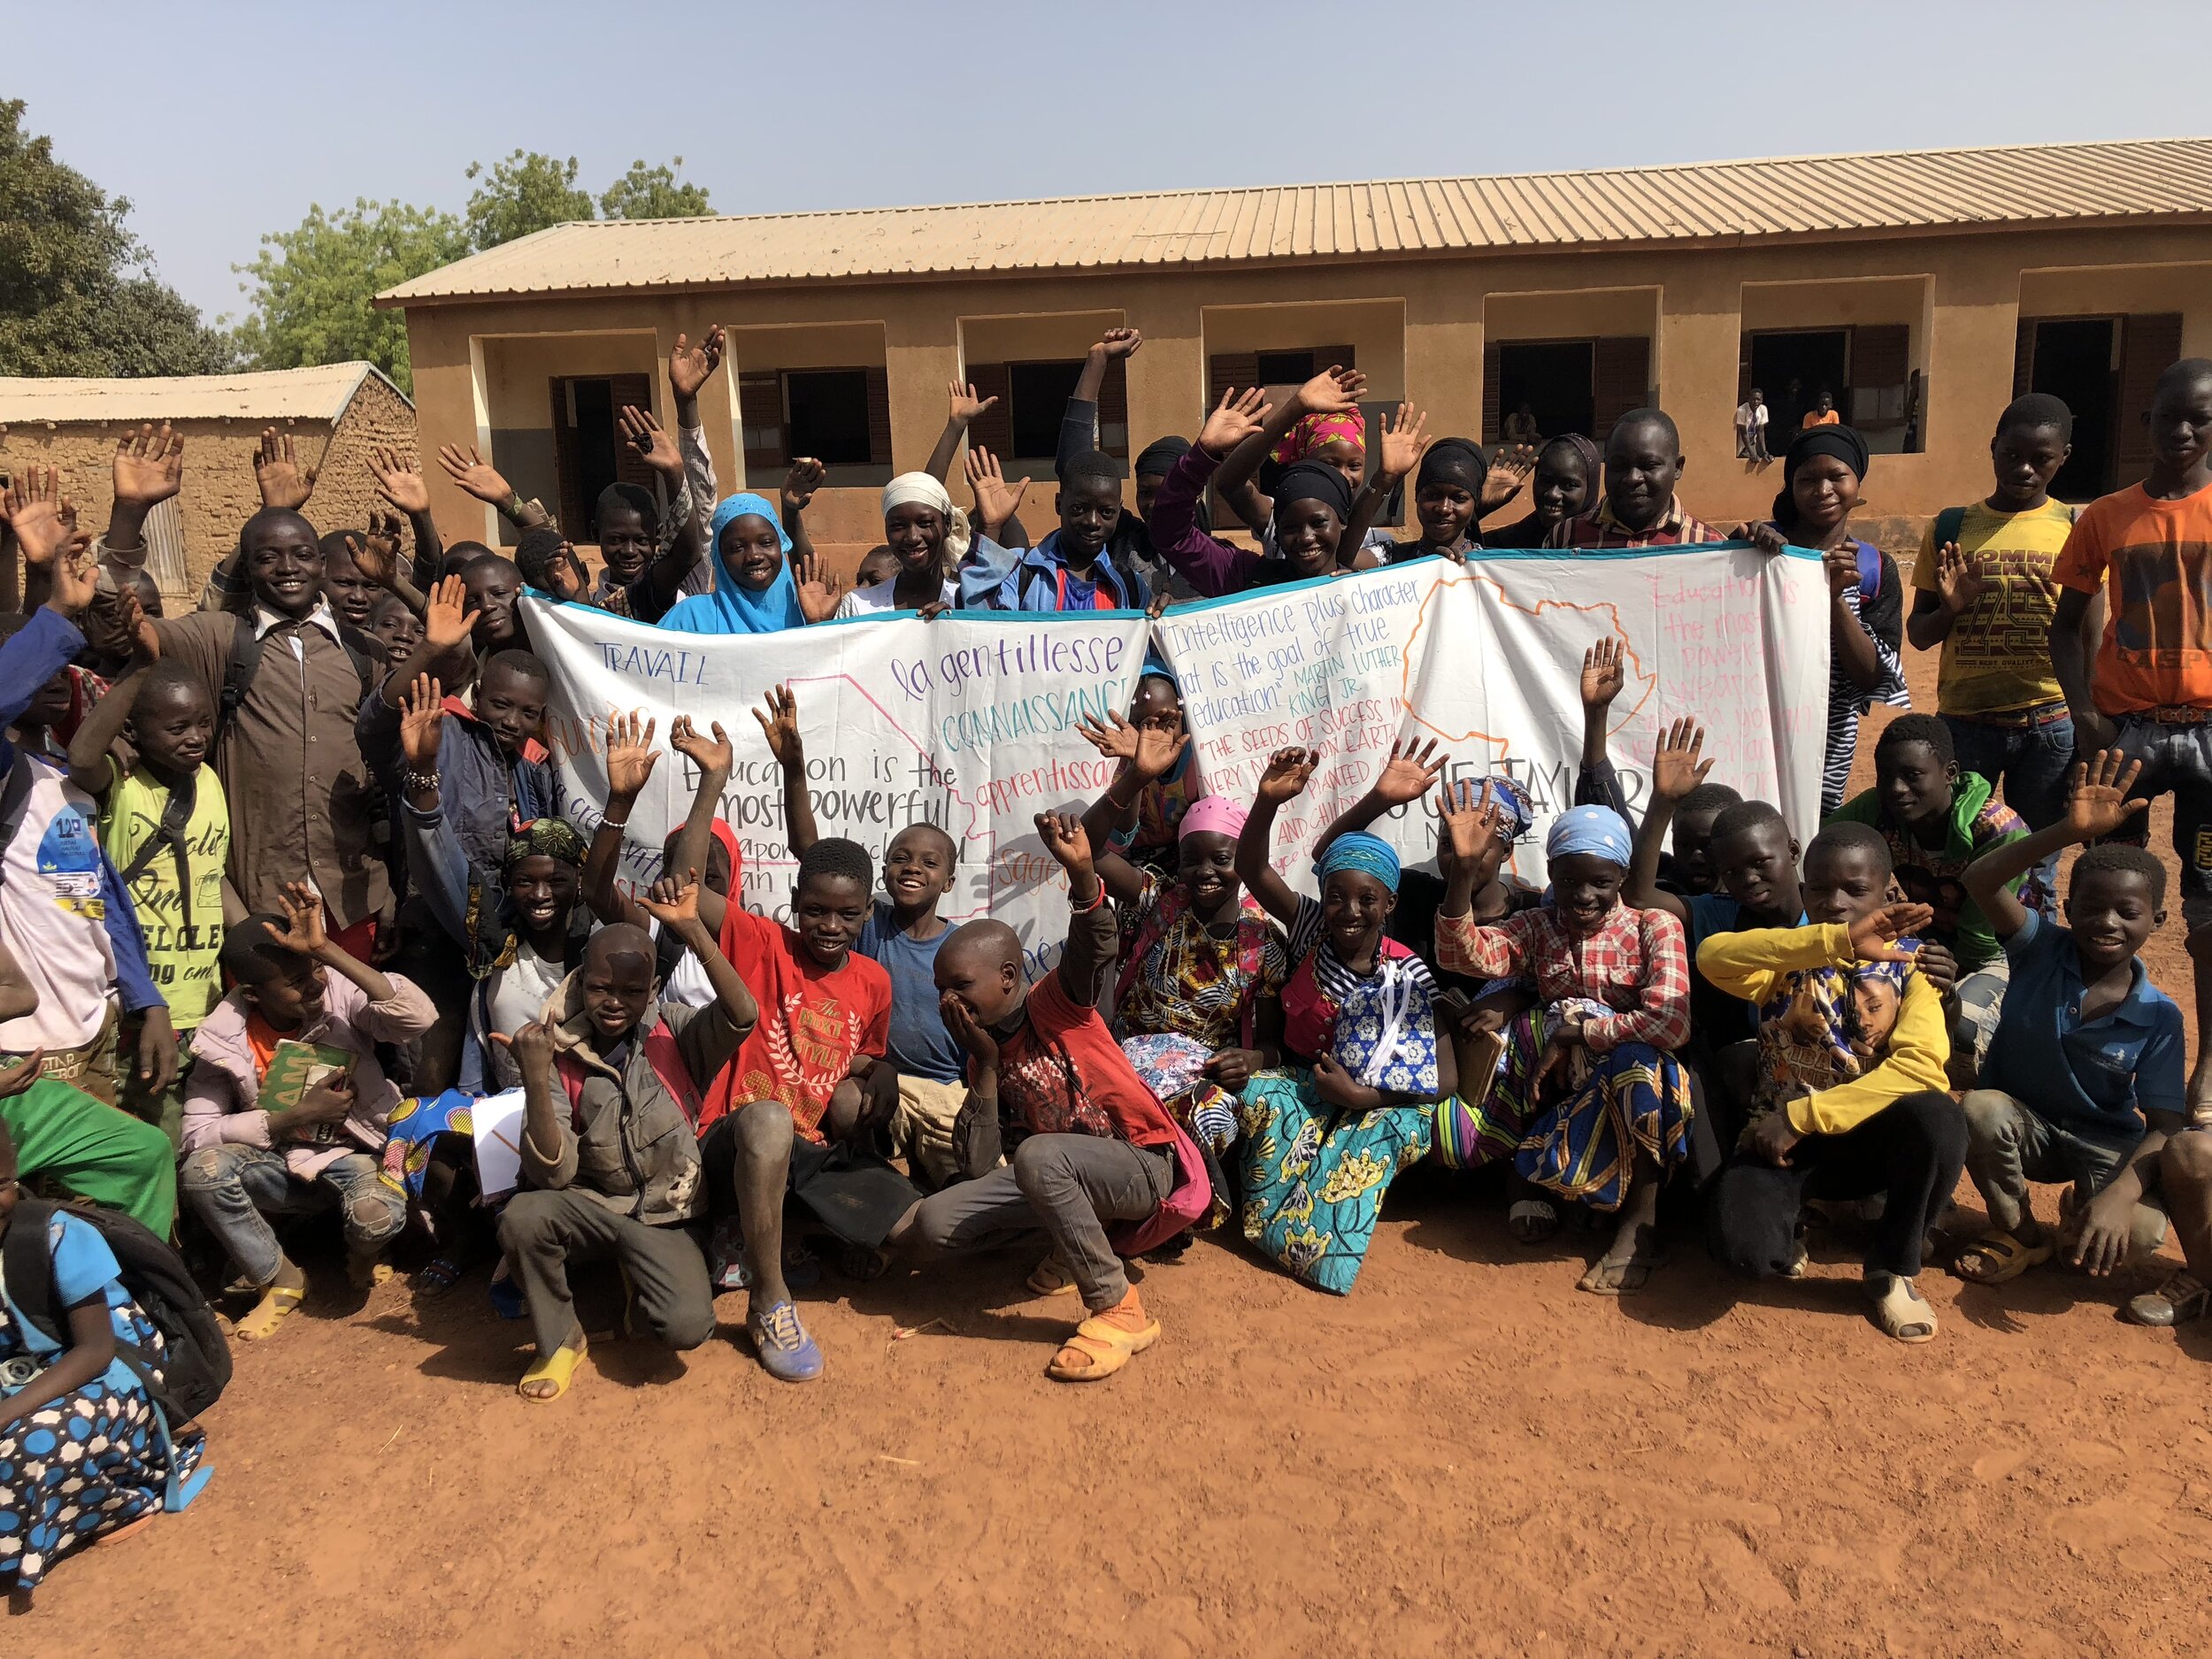 Students of Diorila with banners made for them by Mali Rising volunteers.